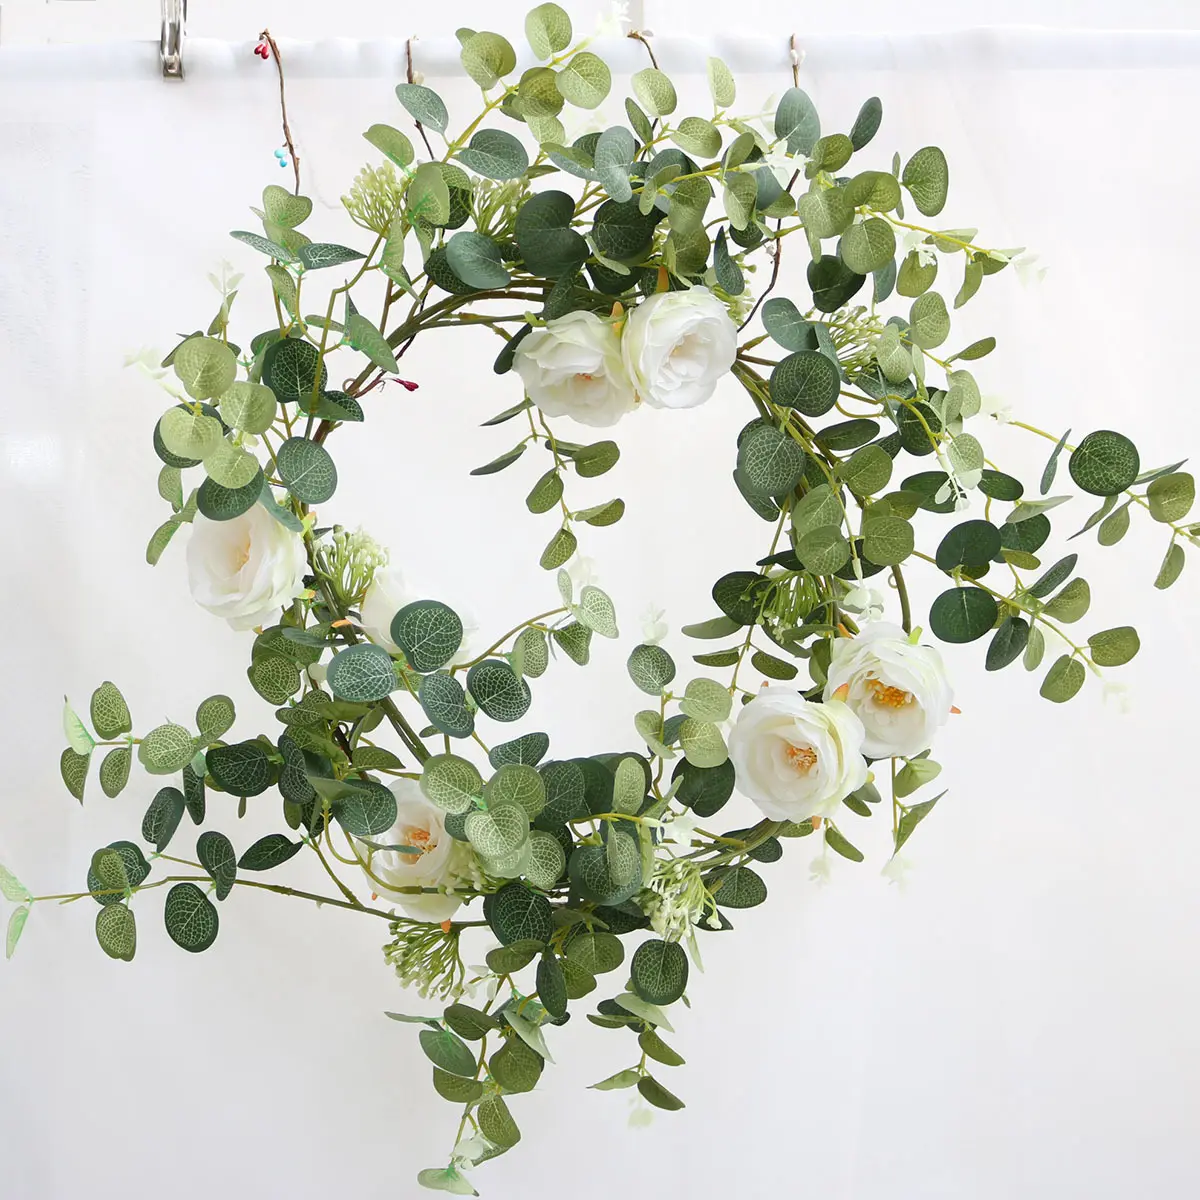 Weddings and Parties Decor Faux Greenery Eucalyptus Vine Artificial Eucalyptus Garland with White Roses Flower